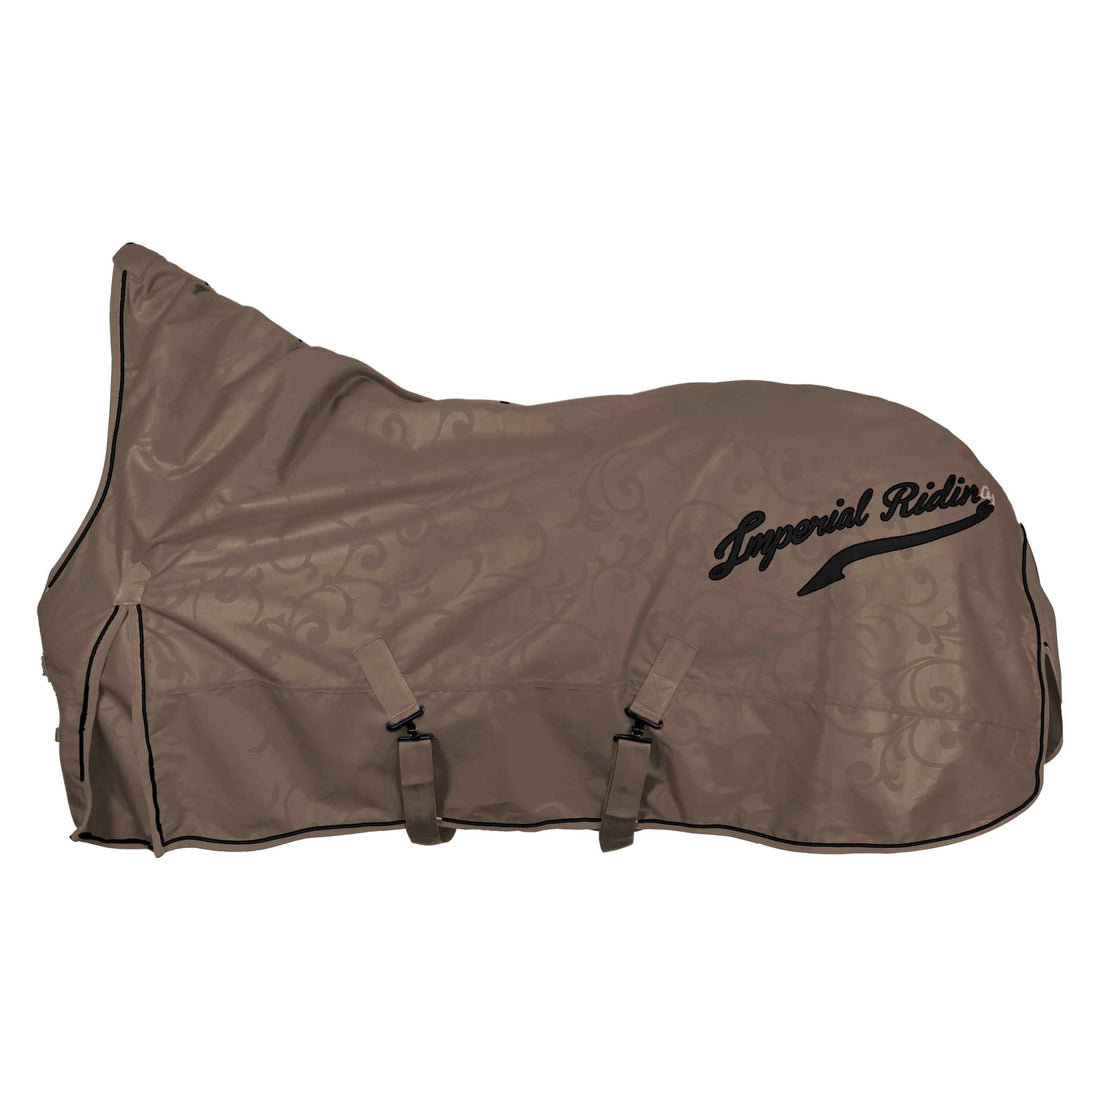 Imperial Riding - Outdoor blanket, Super-dry, 200gr